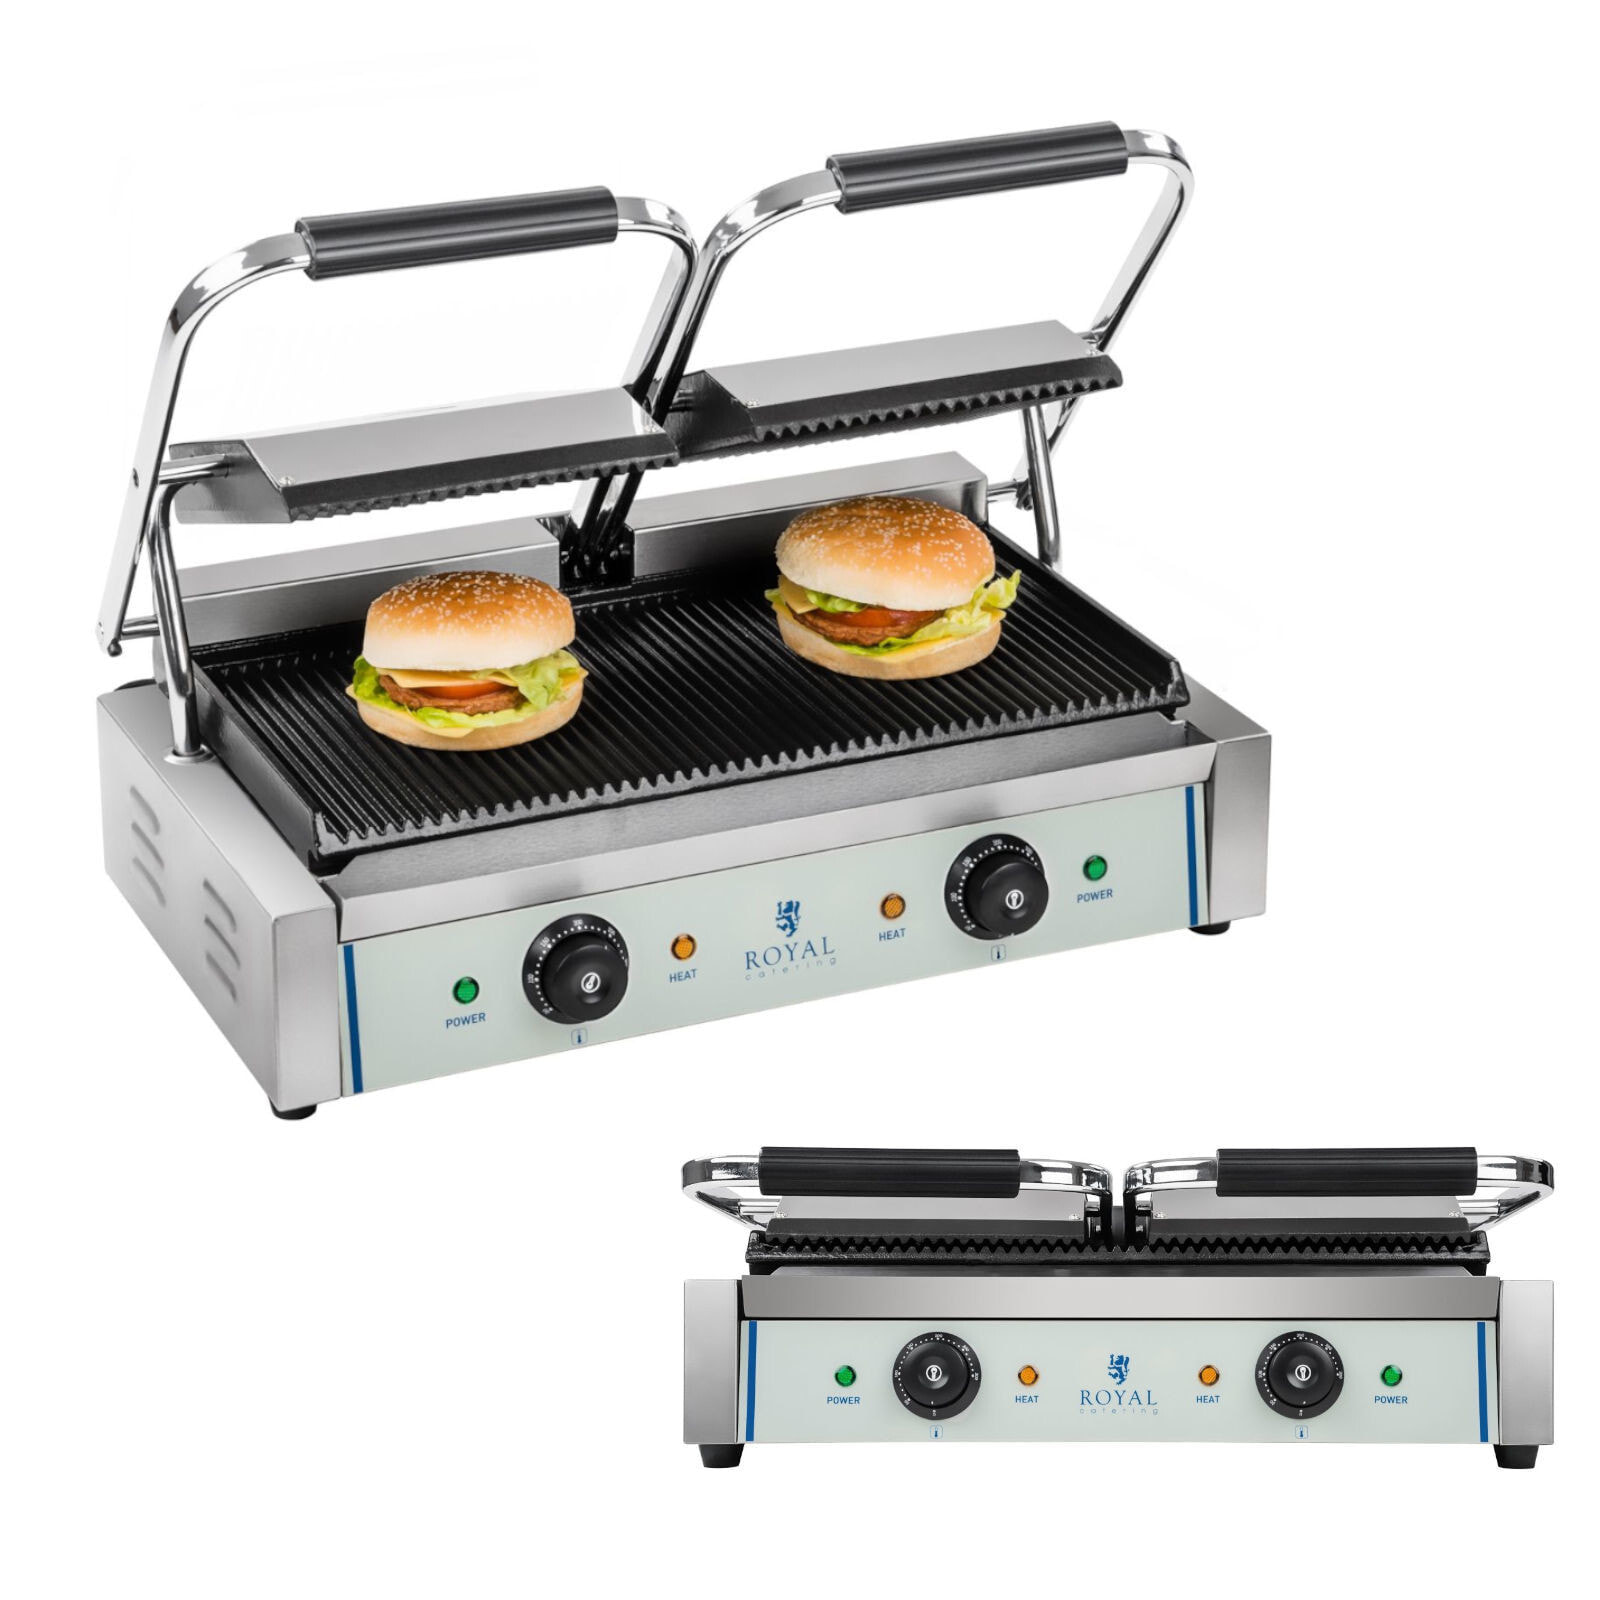 Double-sided grooved contact grill